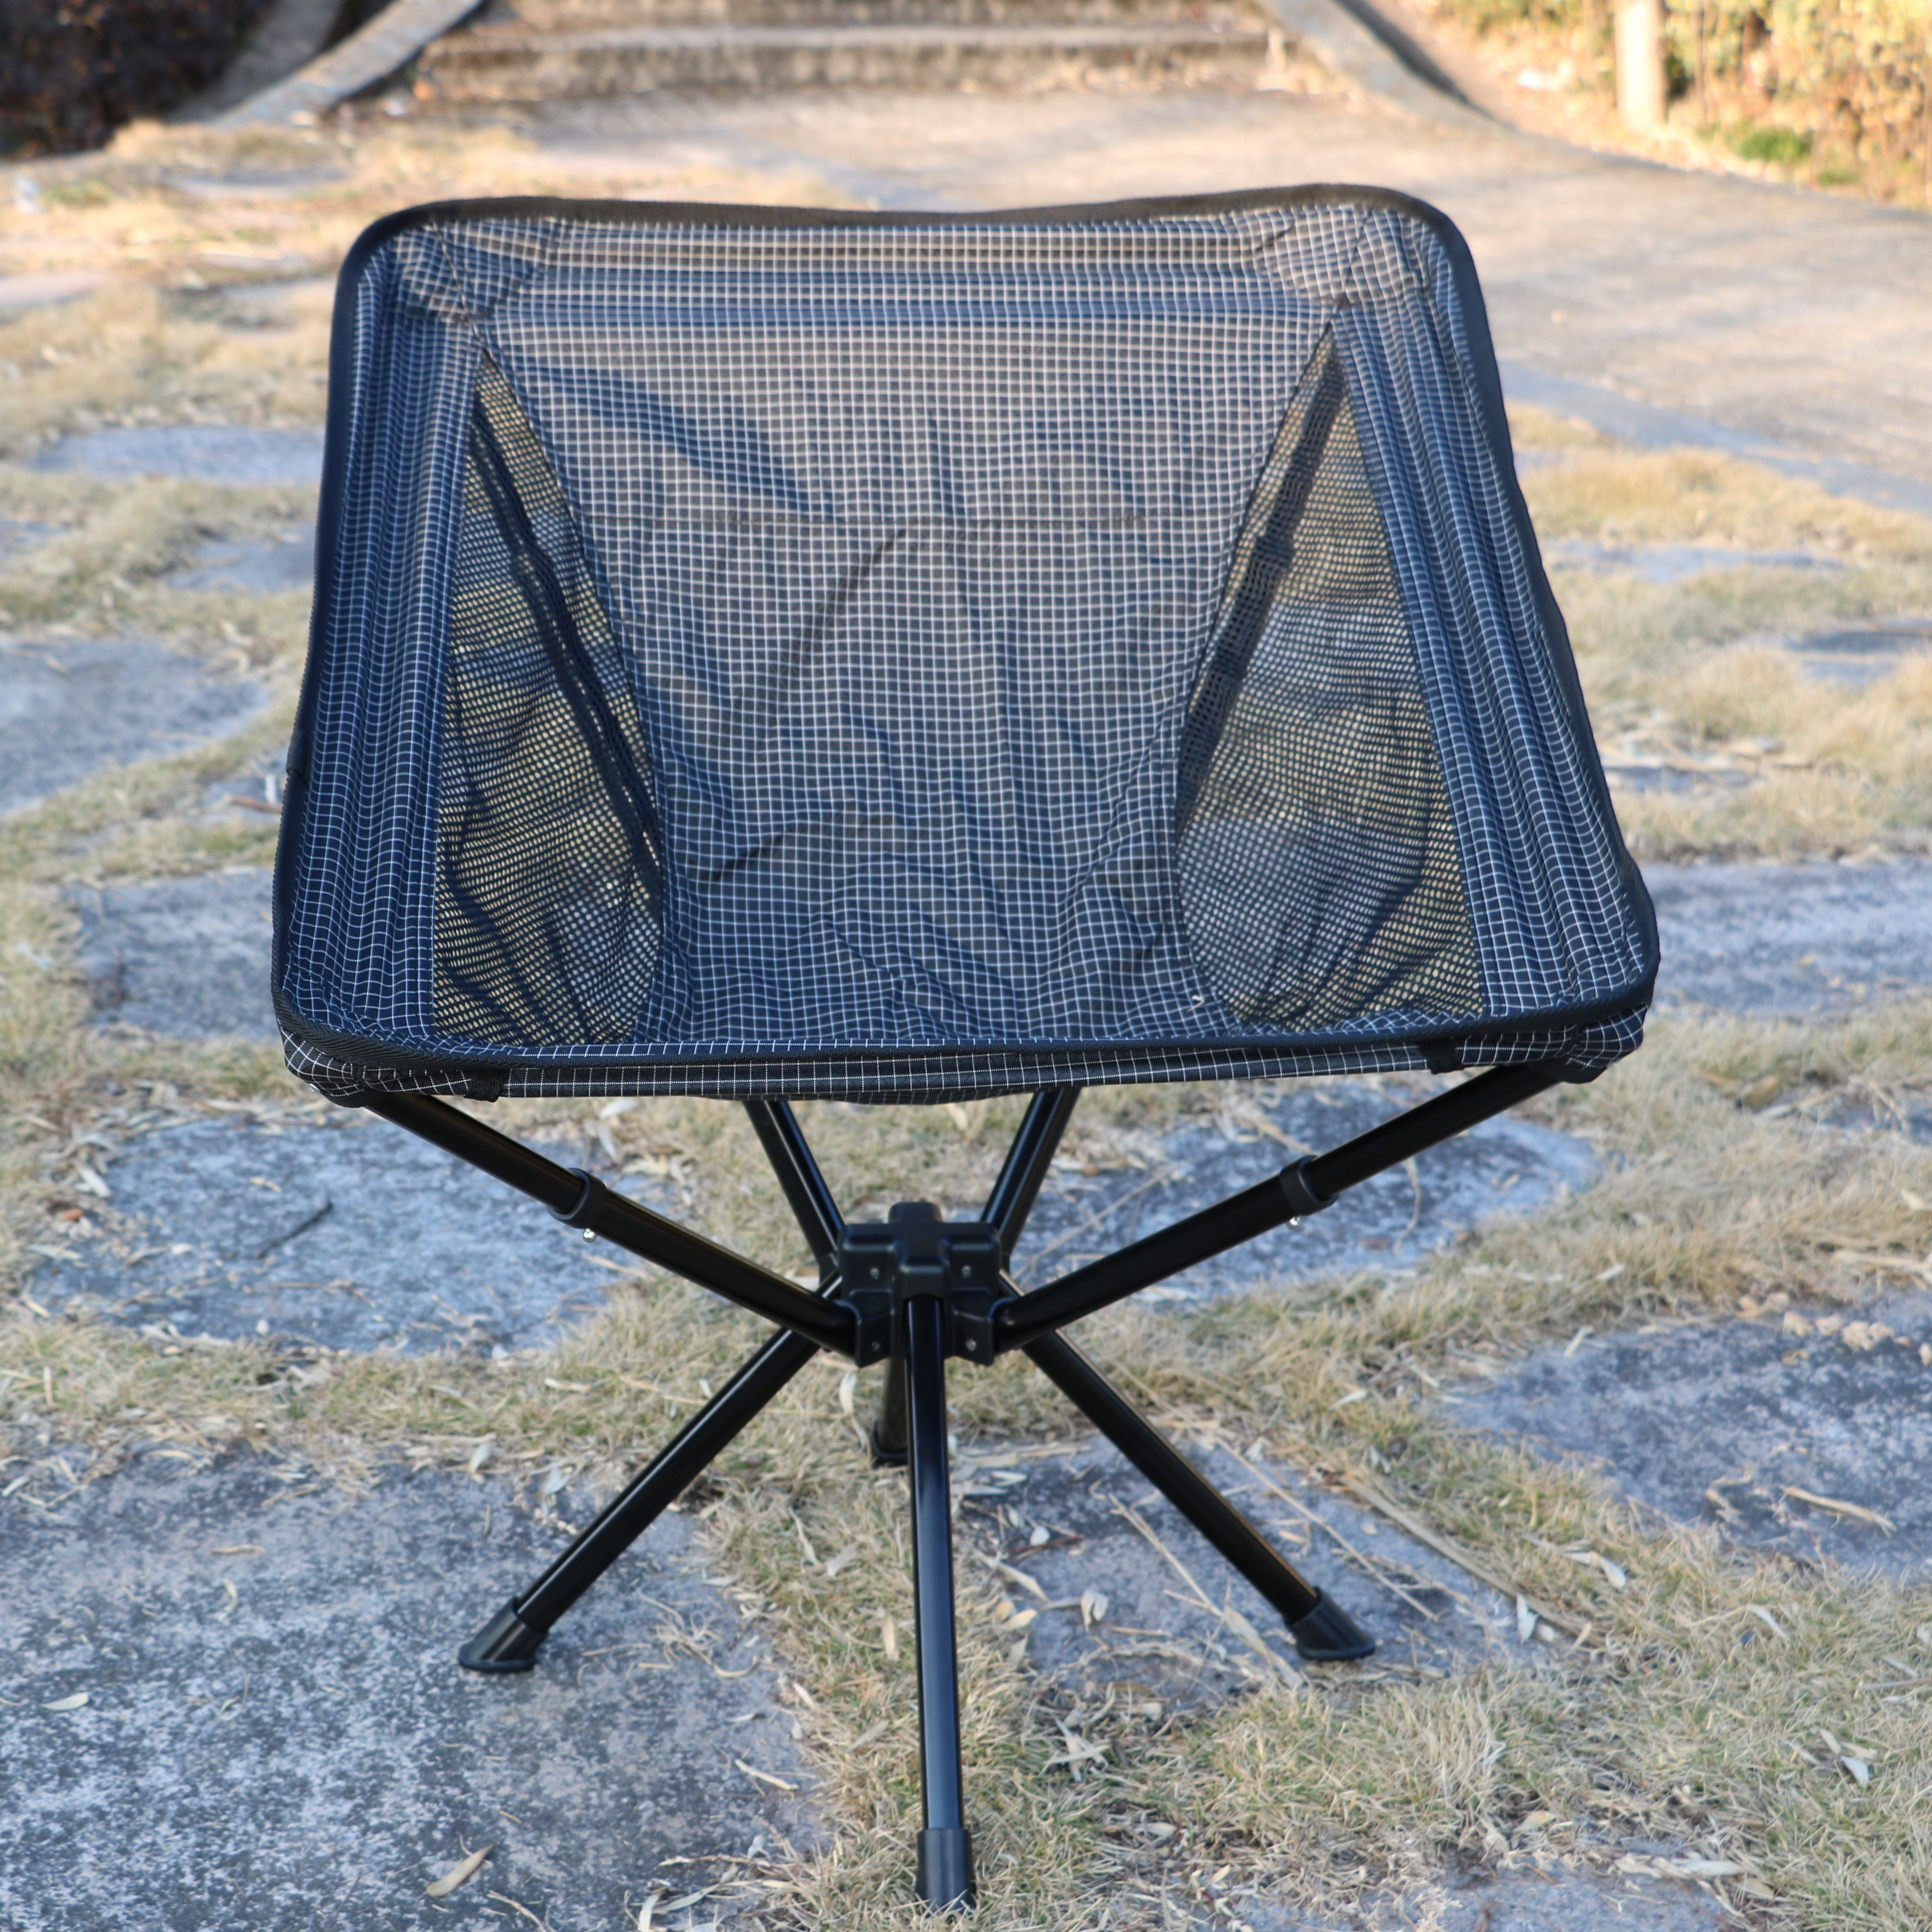 1pc Casual Portable Mountaineering Backpacking Chair Foldable